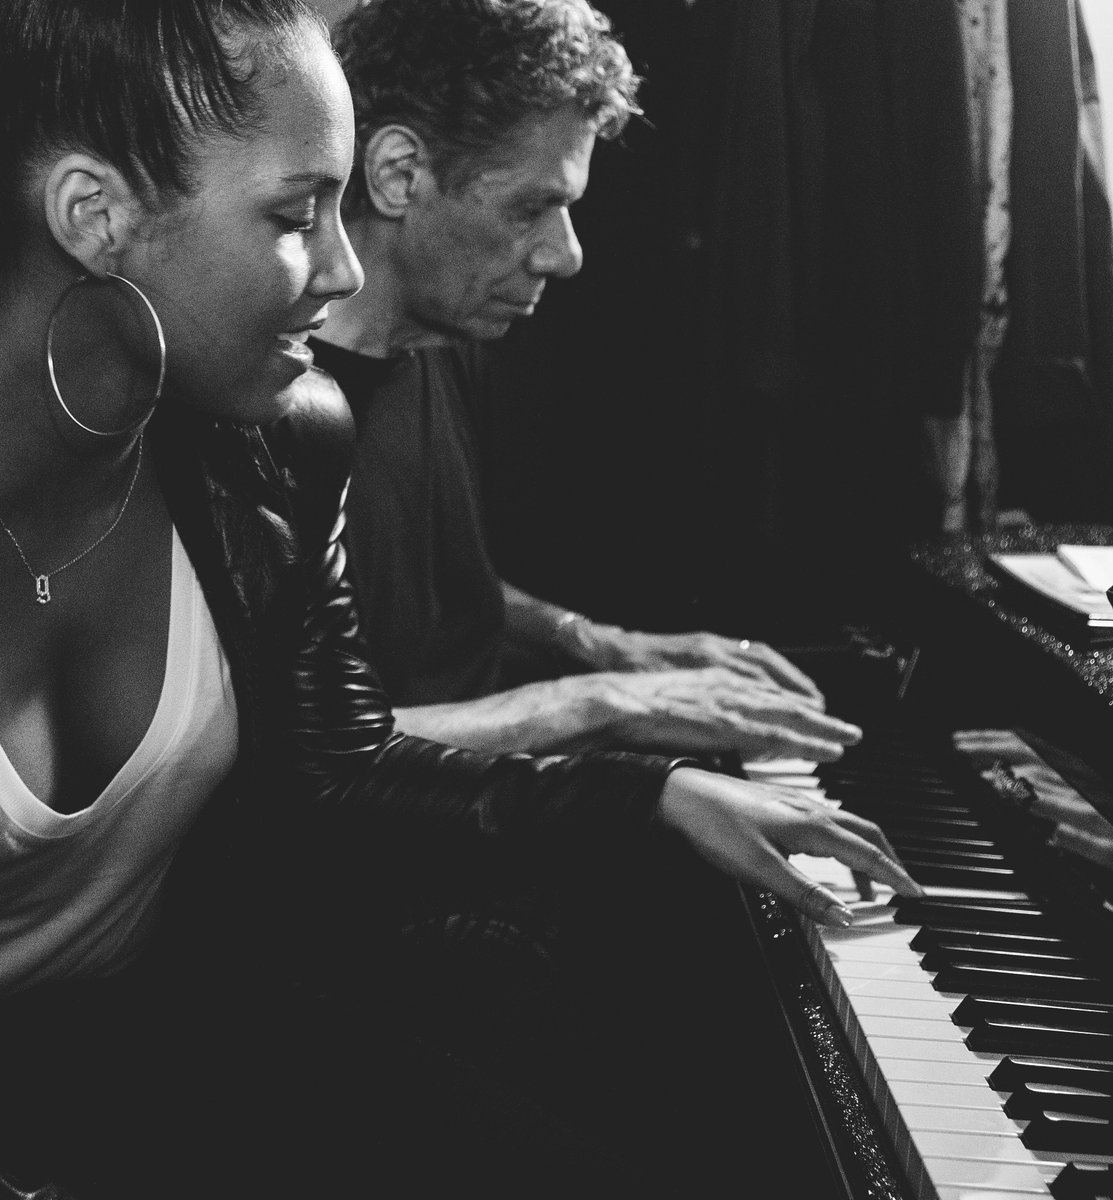 This happened this week... 4 hands on the piano with legendary @ChickCorea... Pinch me ‼️‼️???????????????? https://t.co/NcyCoaogmG